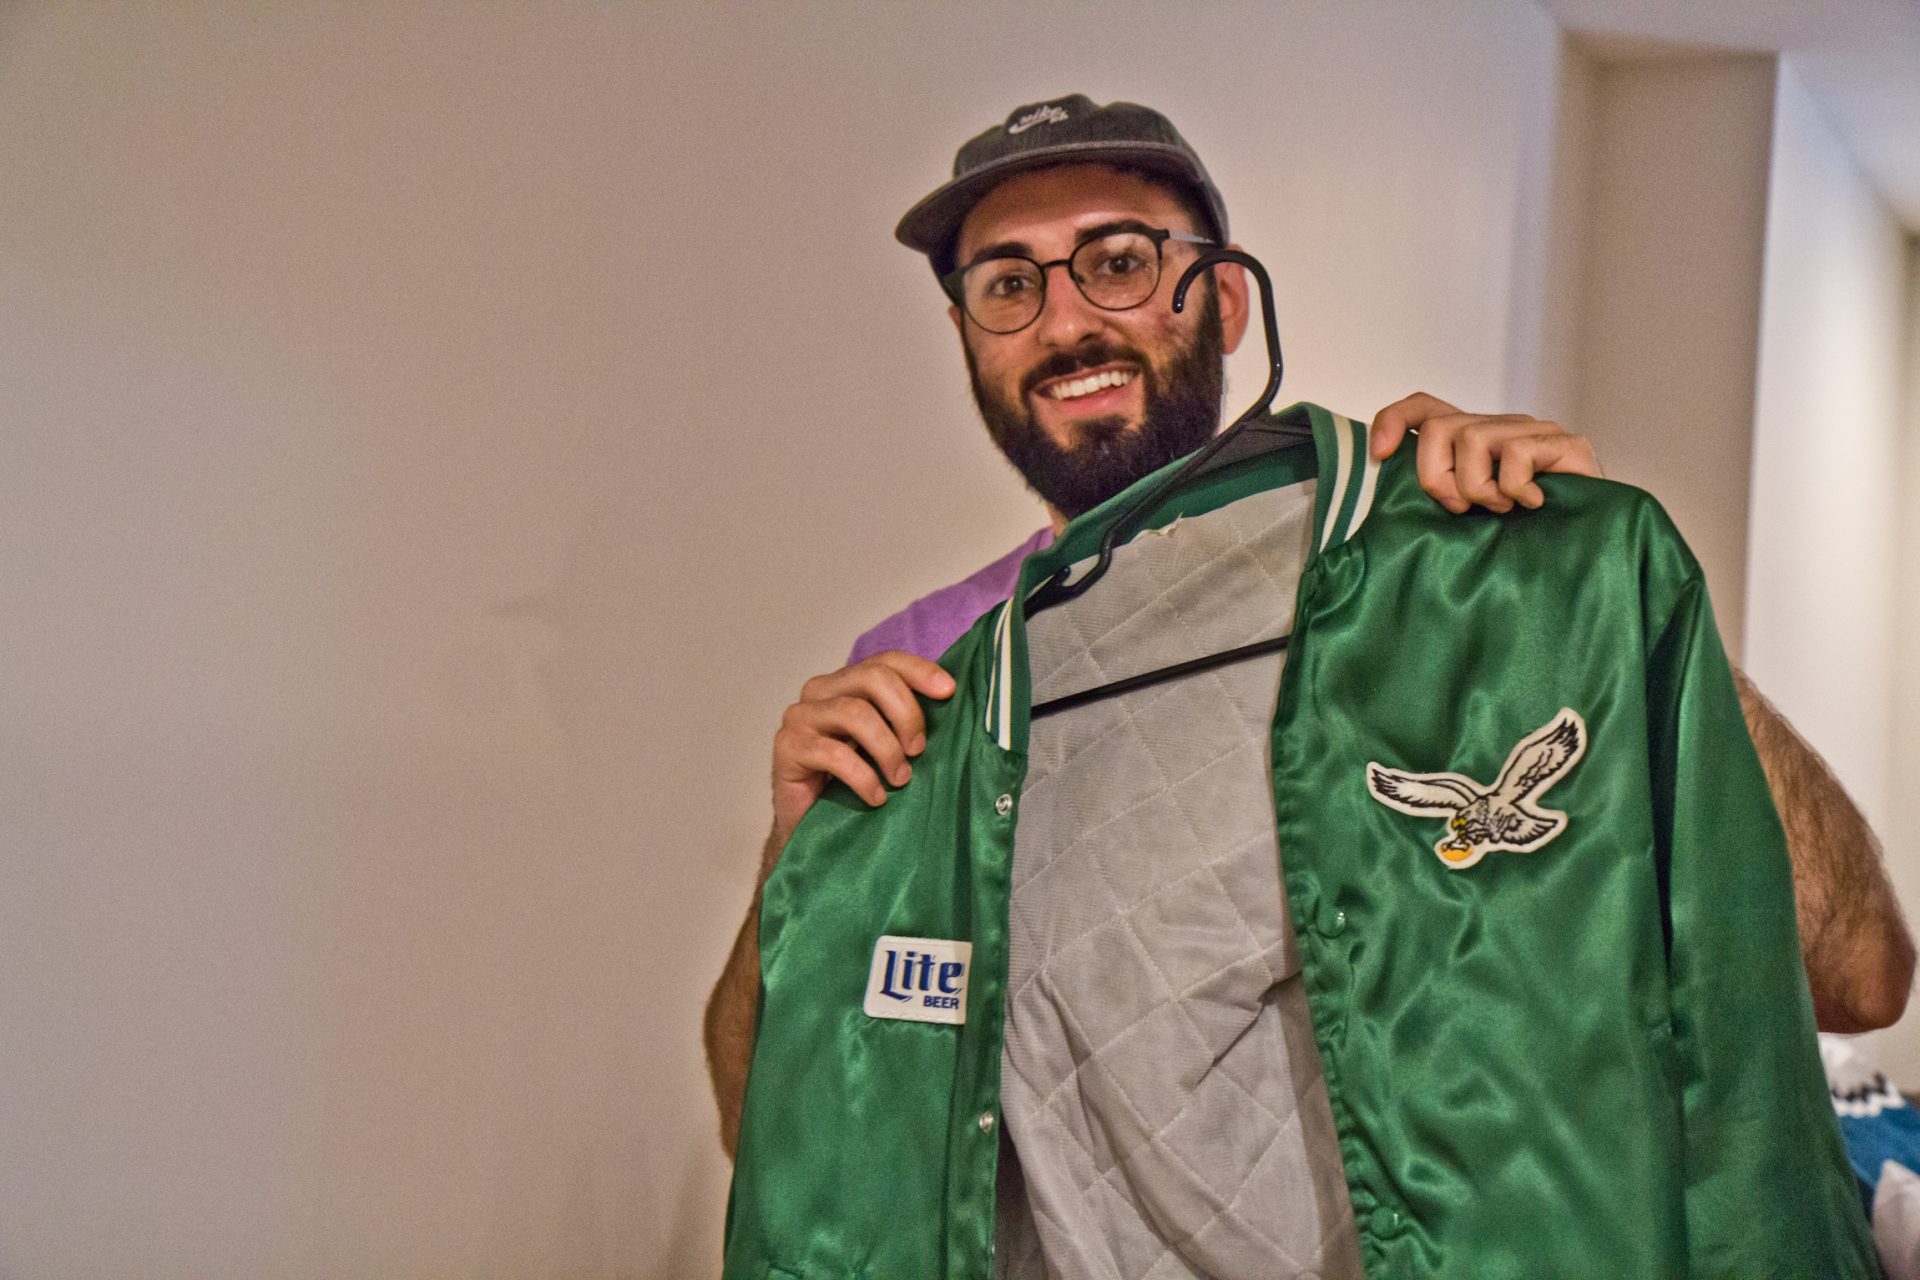 Shamus Clancy, Philadelphia writer and sports super fan, was gifted a classic Eagles jacket from his girlfriend, whom he met the night of the Eagles Super Bowl parade.